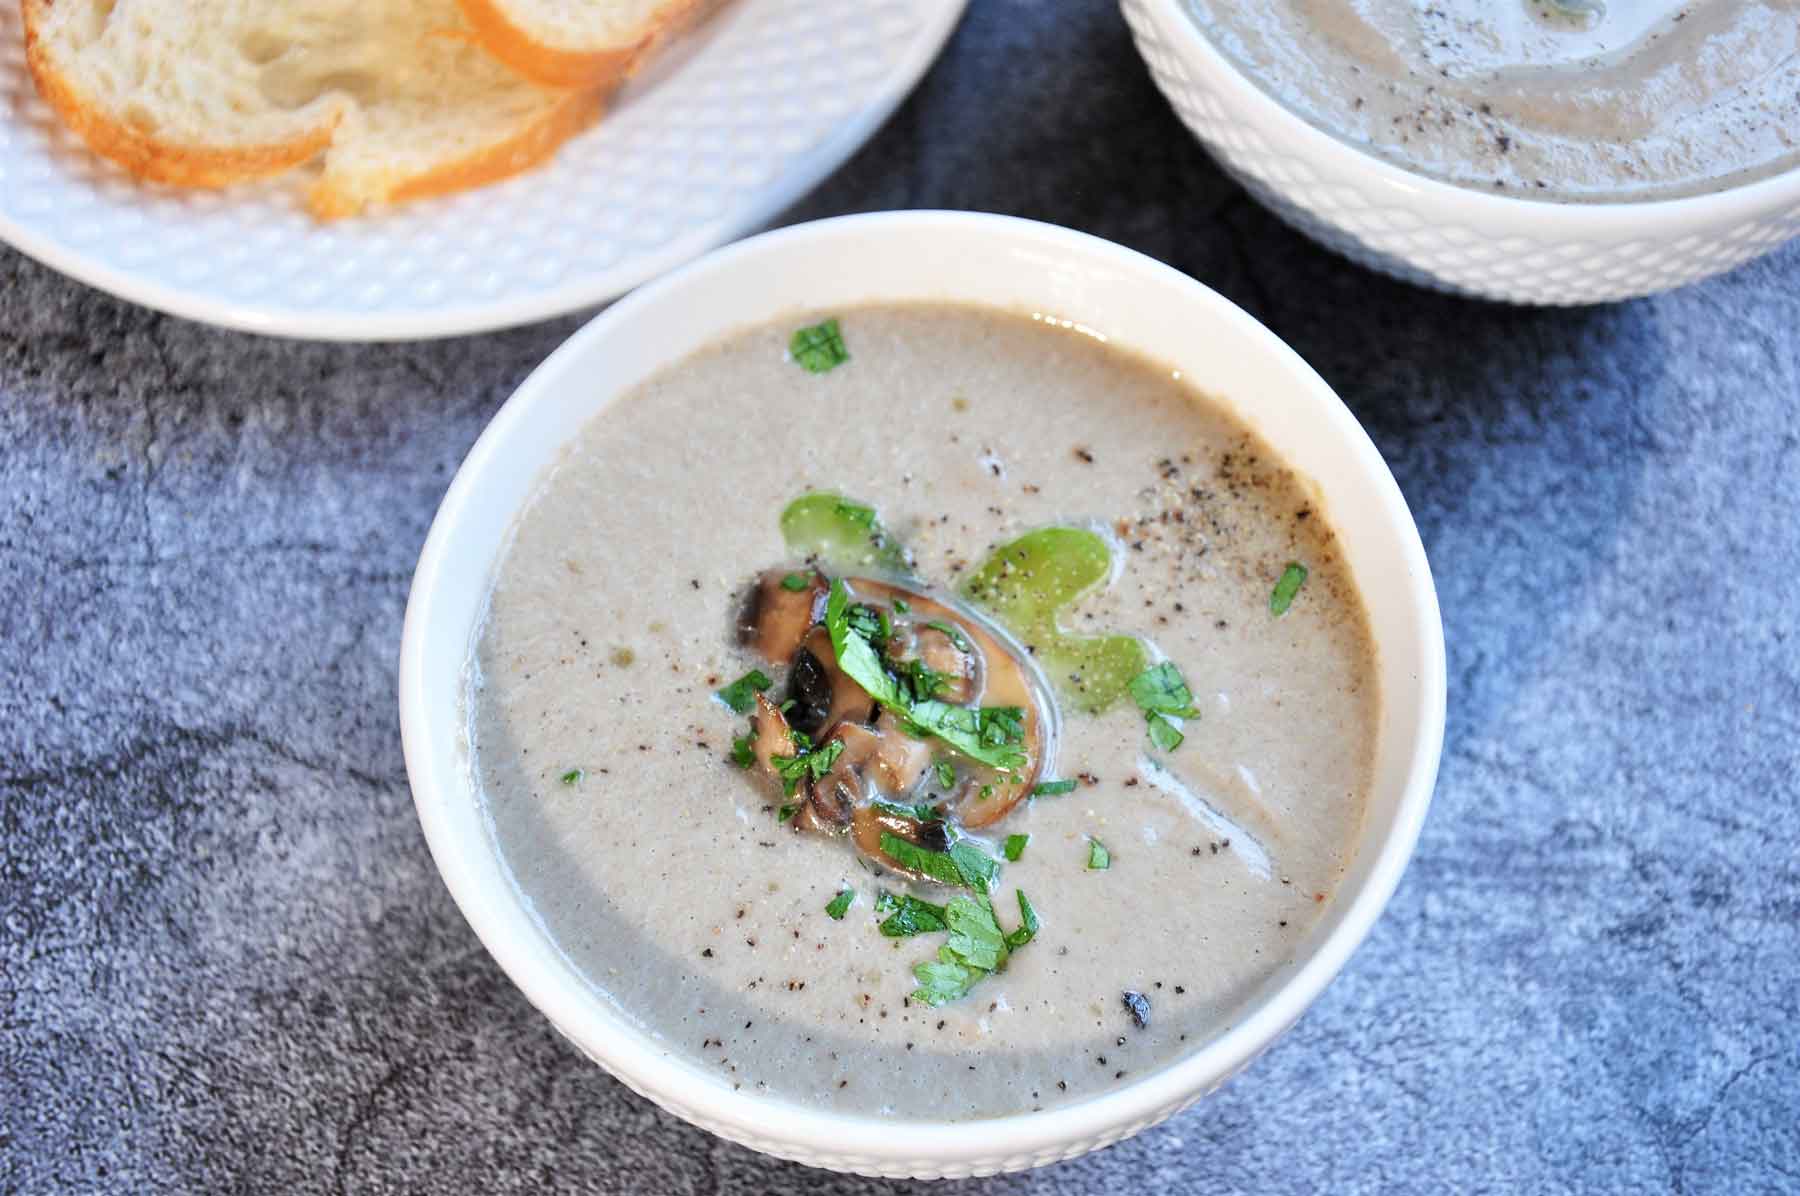 Cream of mushroom soup in a bowl garnished with cooked sliced mushroom and cilantro.